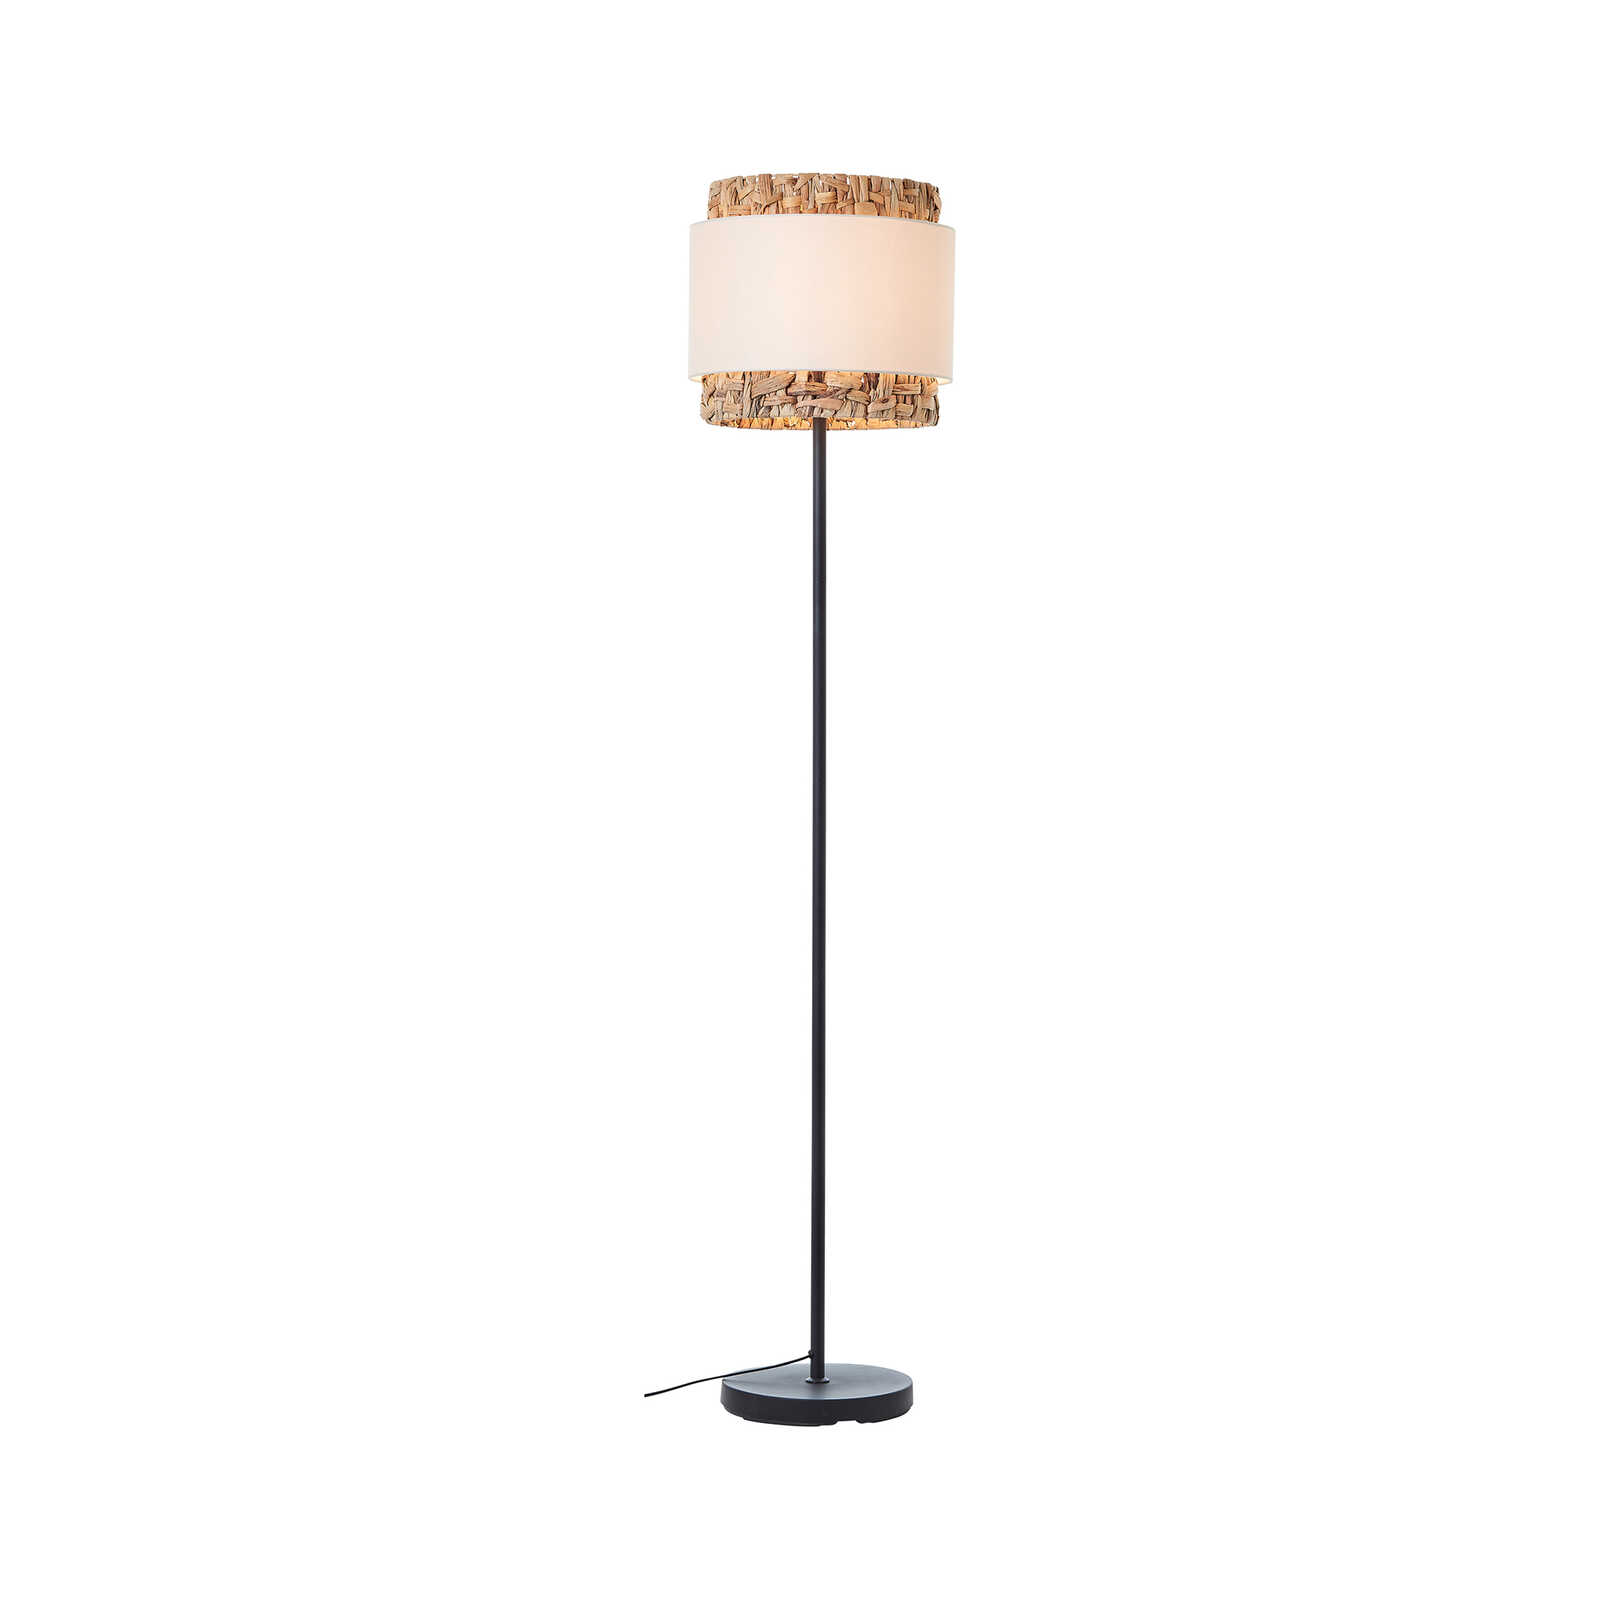 Floor lamp made of textile - Till 7 - Brown
